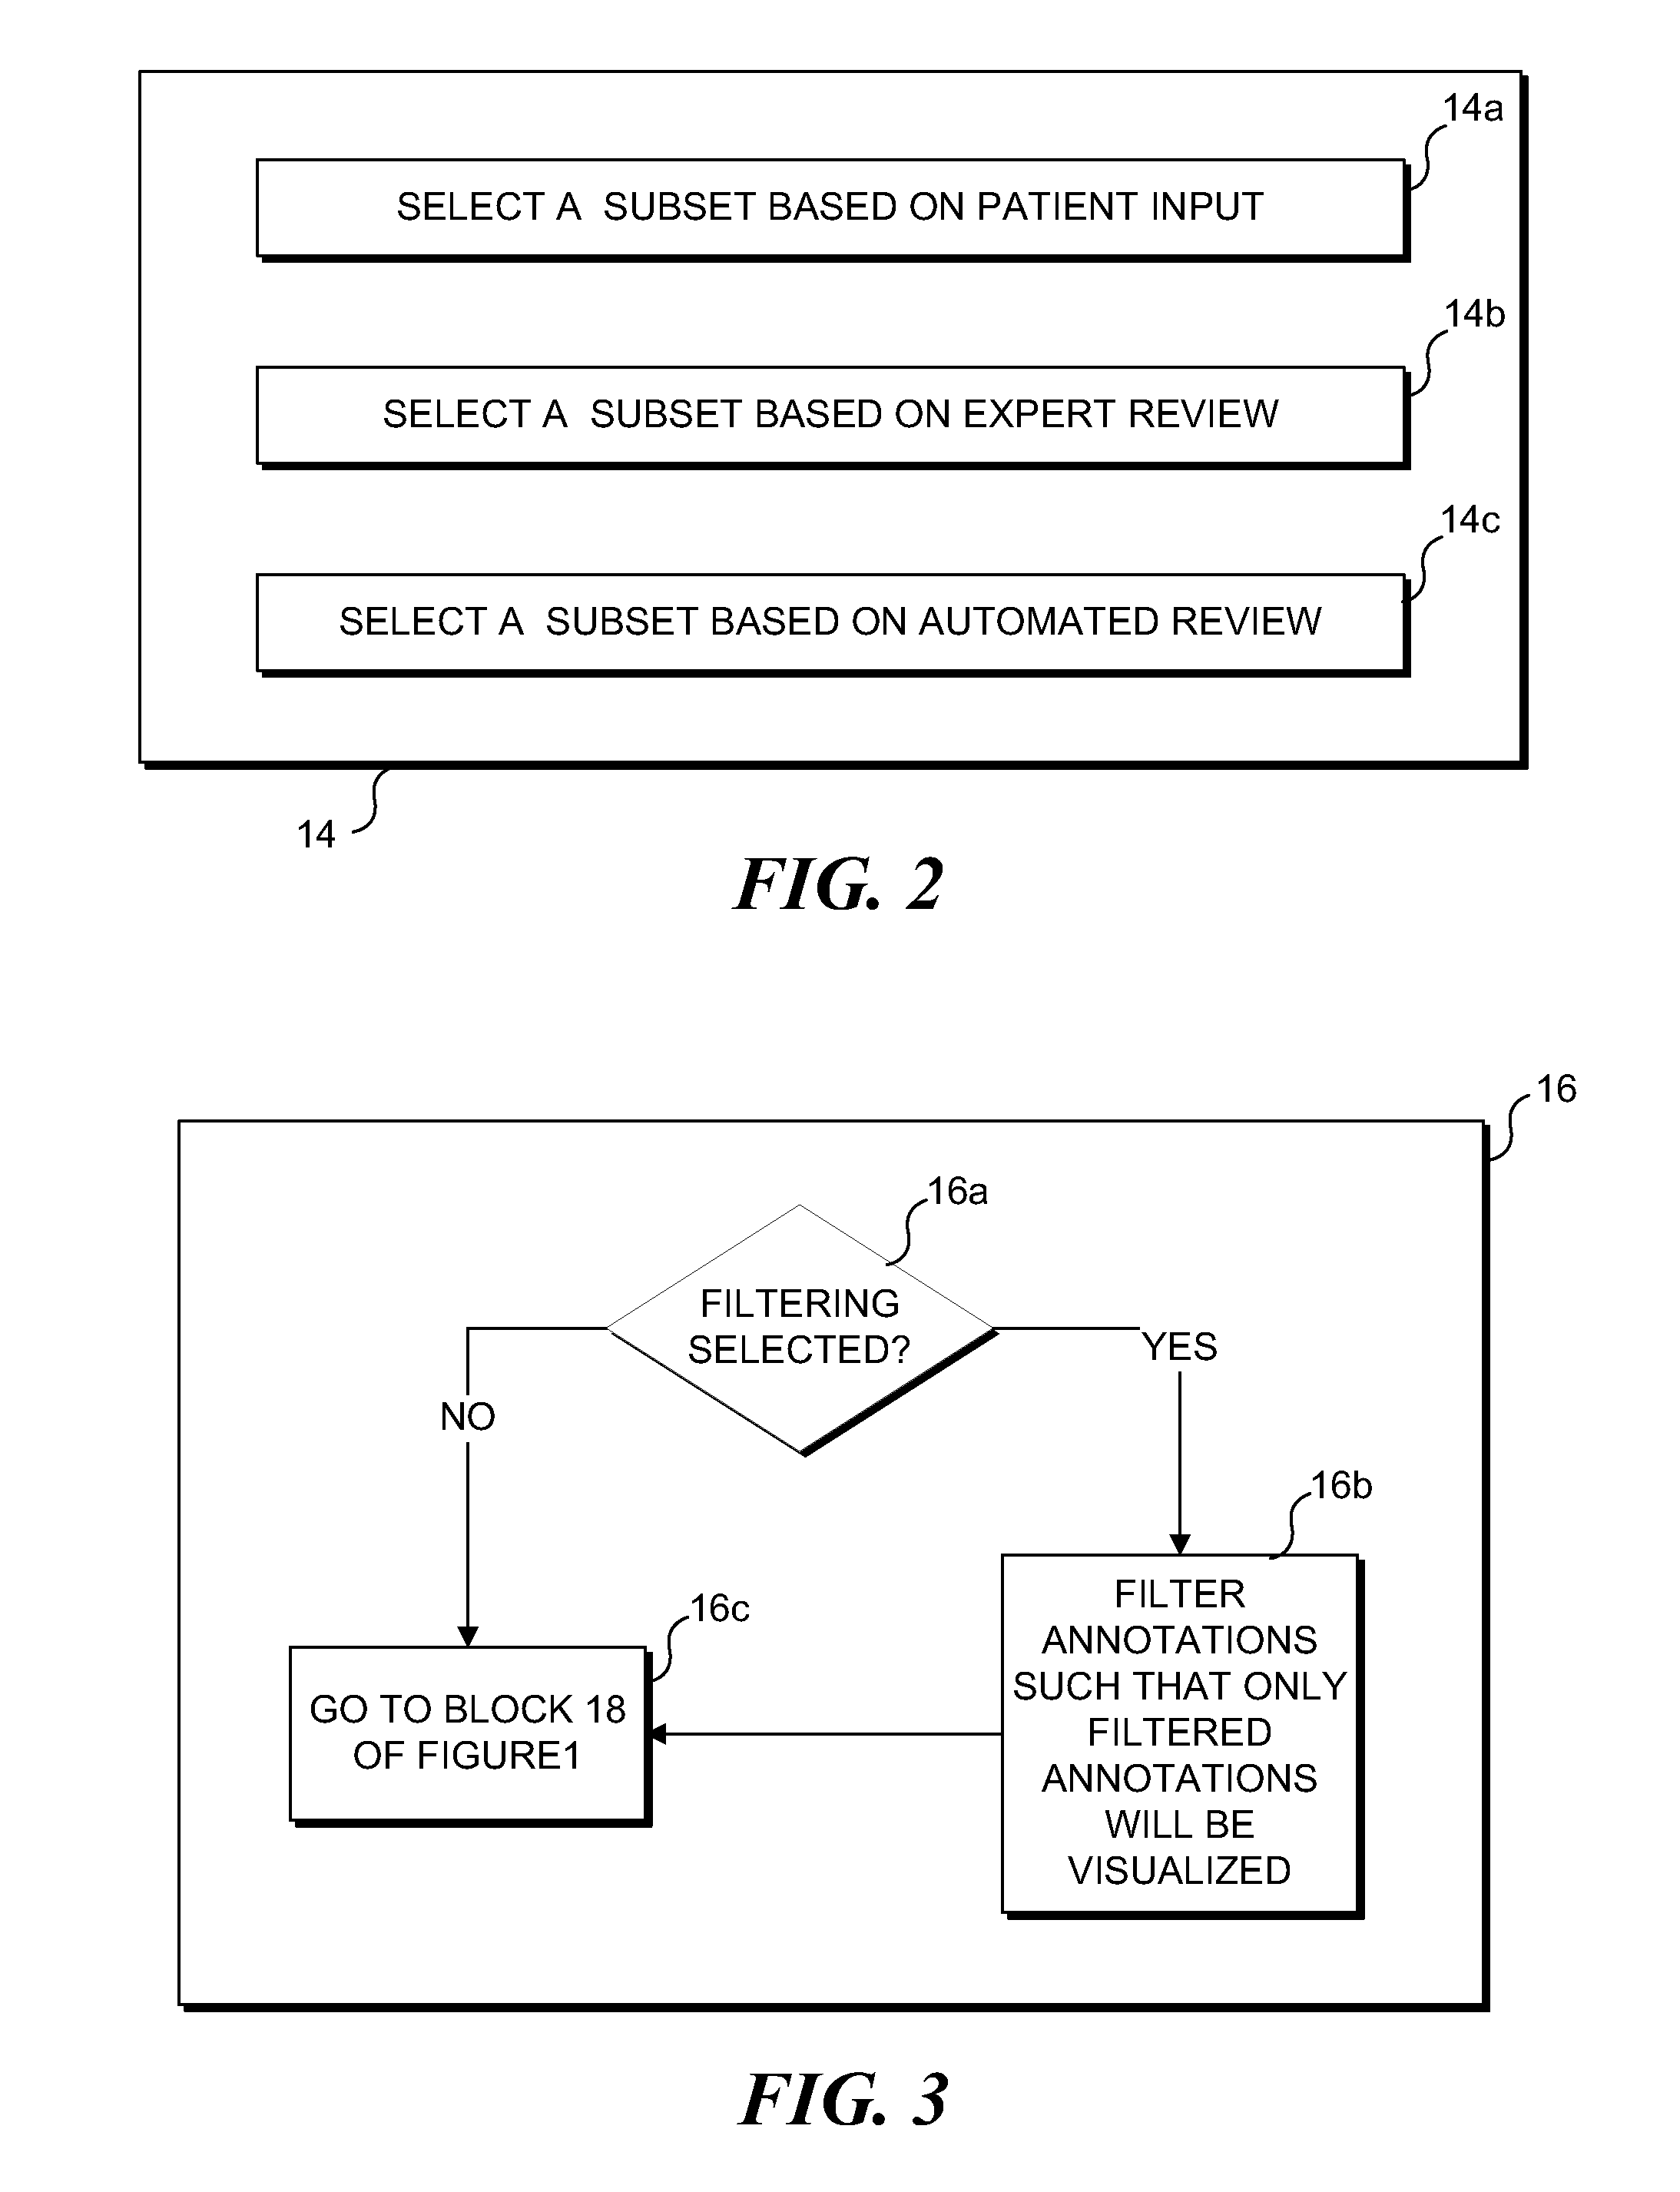 Displaying and Manipulating Brain Function Data Including Filtering of Annotations